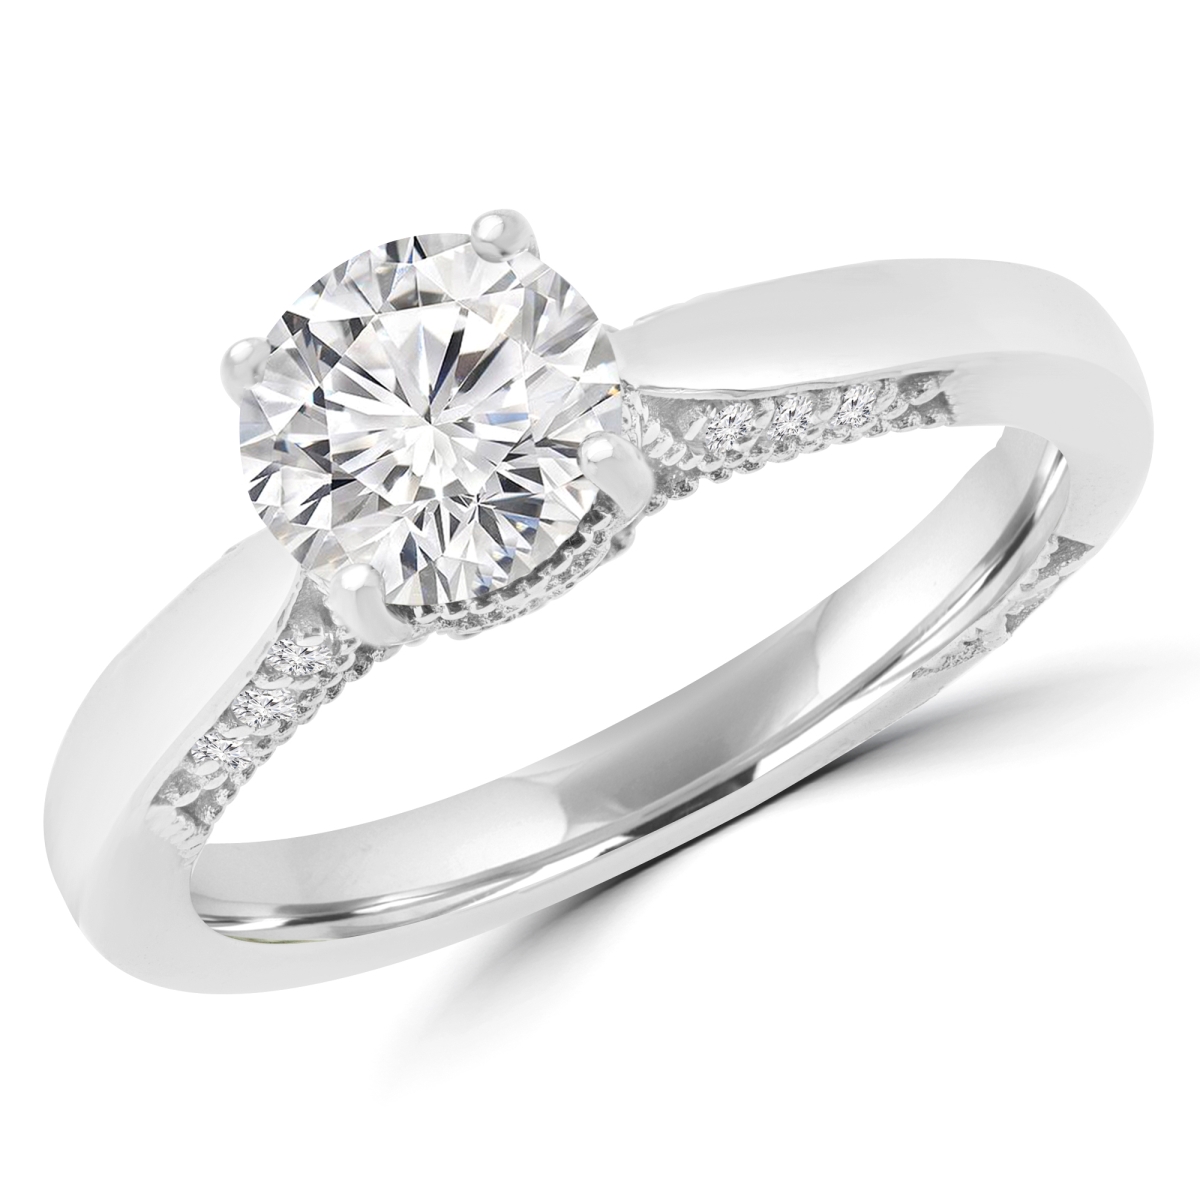 Picture of Majesty Diamonds MD170228-8.25 1.12 CTW Round Diamond Solitaire with Accents Engagement Ring in 18K White Gold - Size 8.25